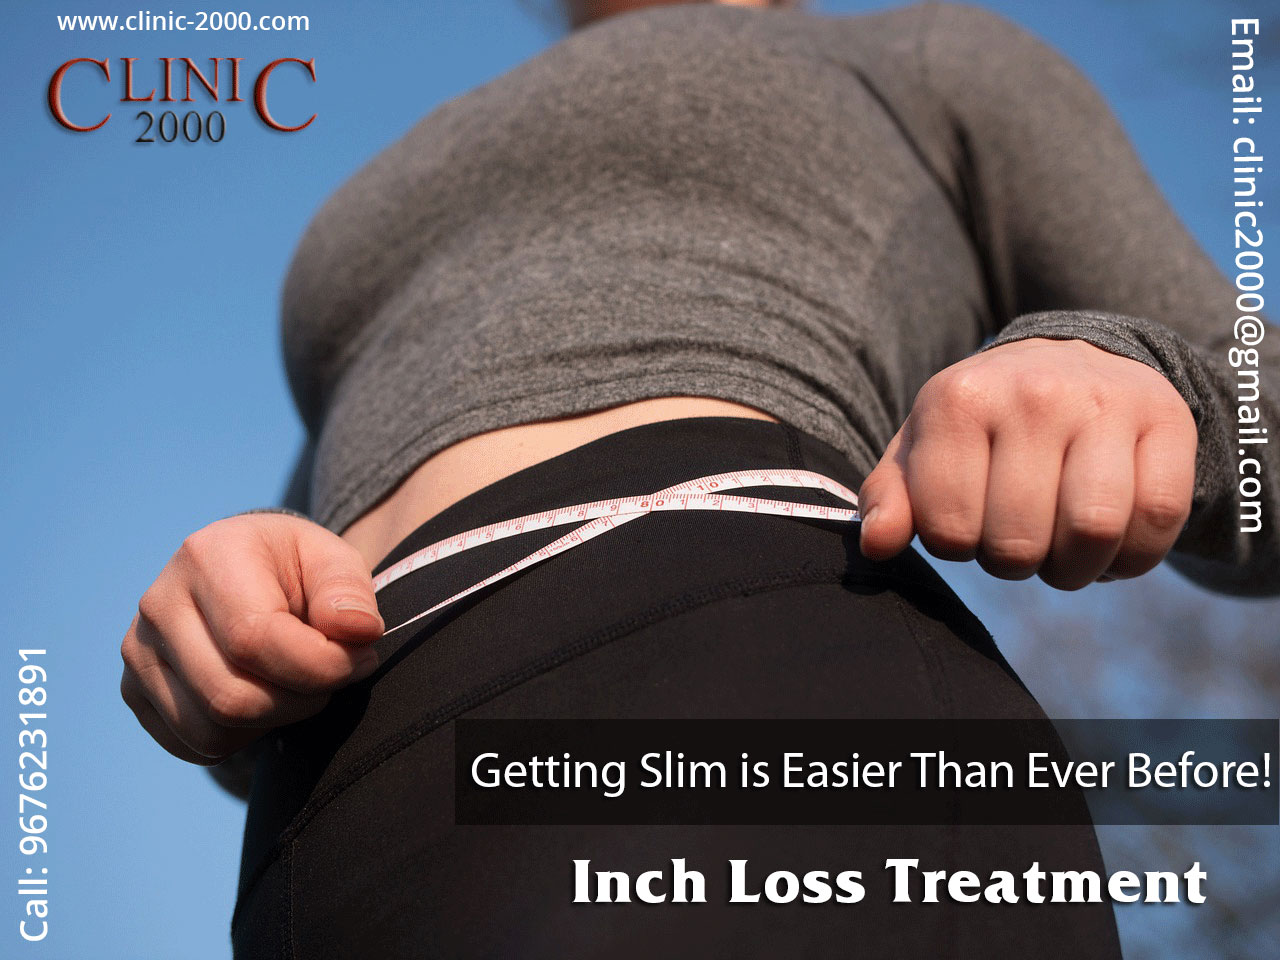 Best inch loss treatment in Hyderabad